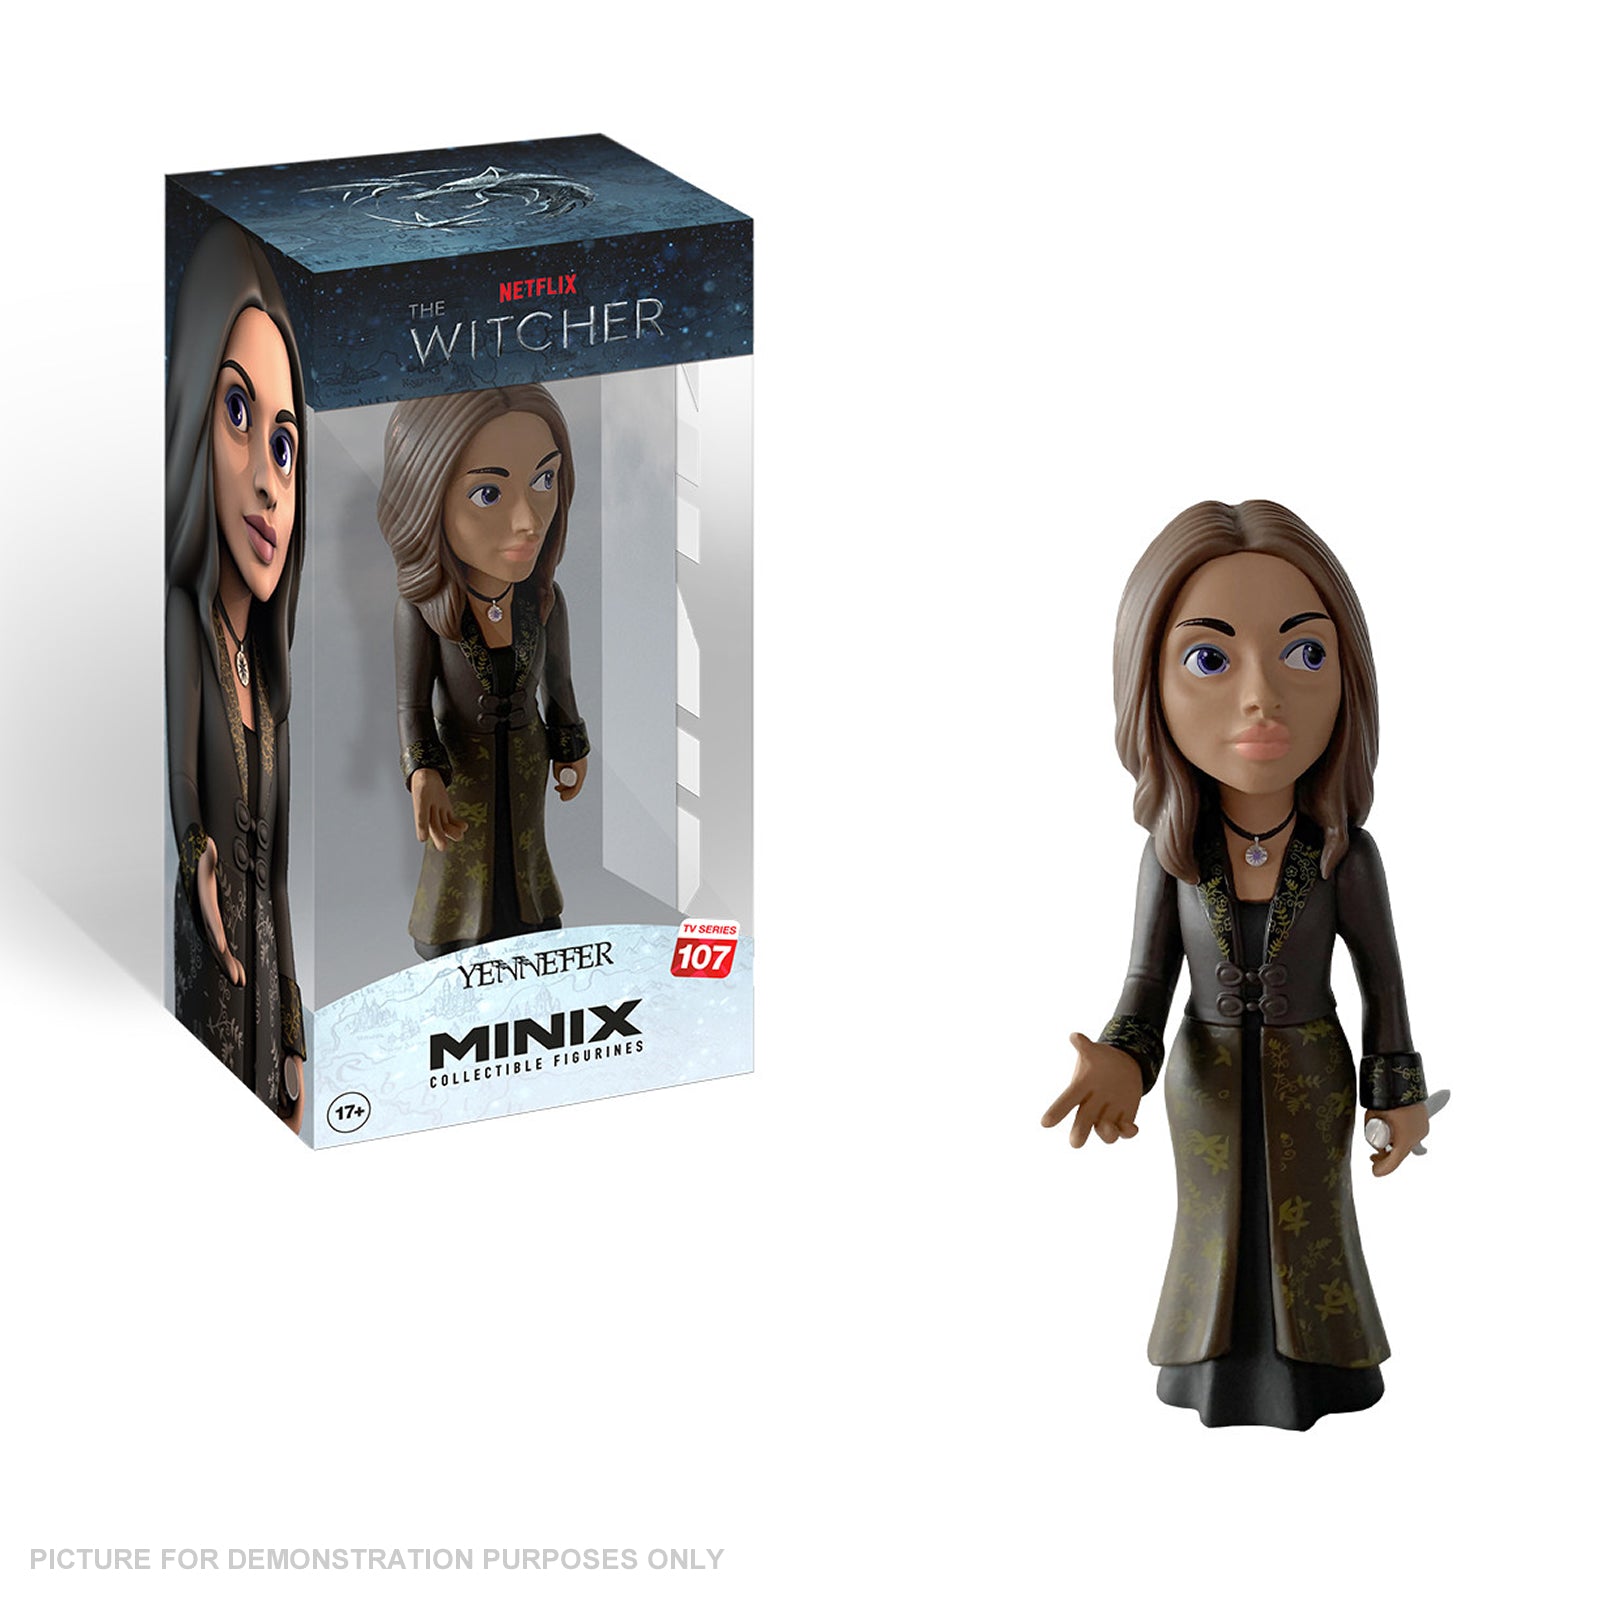 MINIX Collectable Figurine - YENNEFER - The Witcher